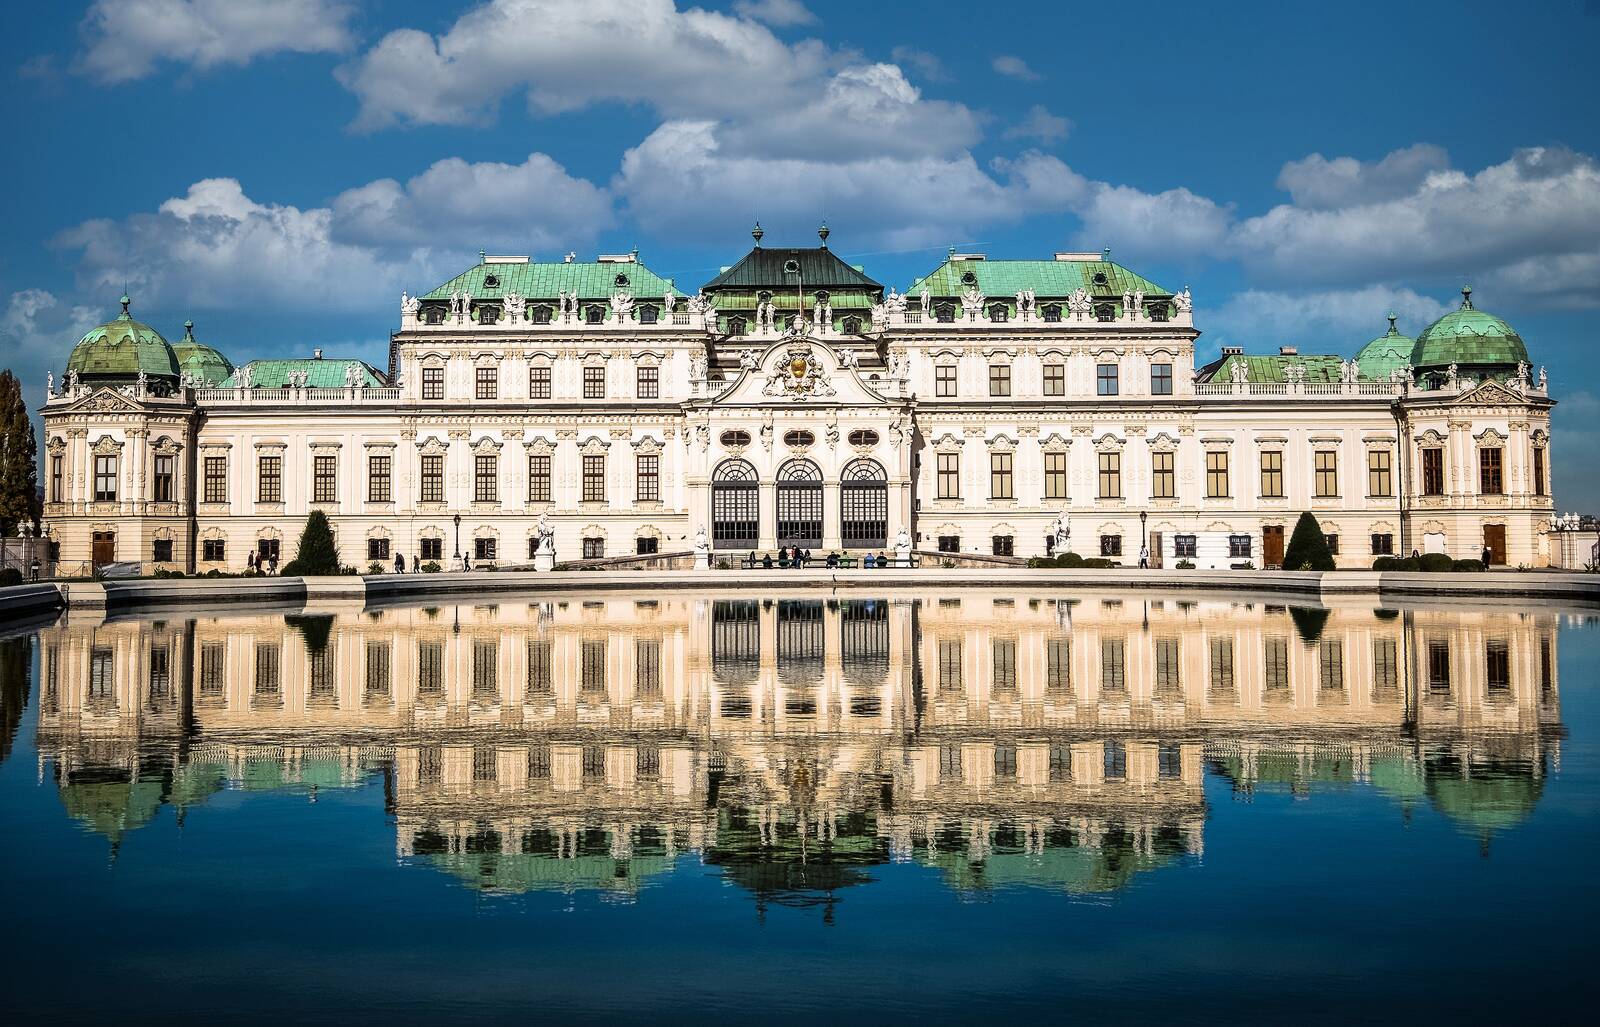 Image of Belvedere Palace II by Victor Prior